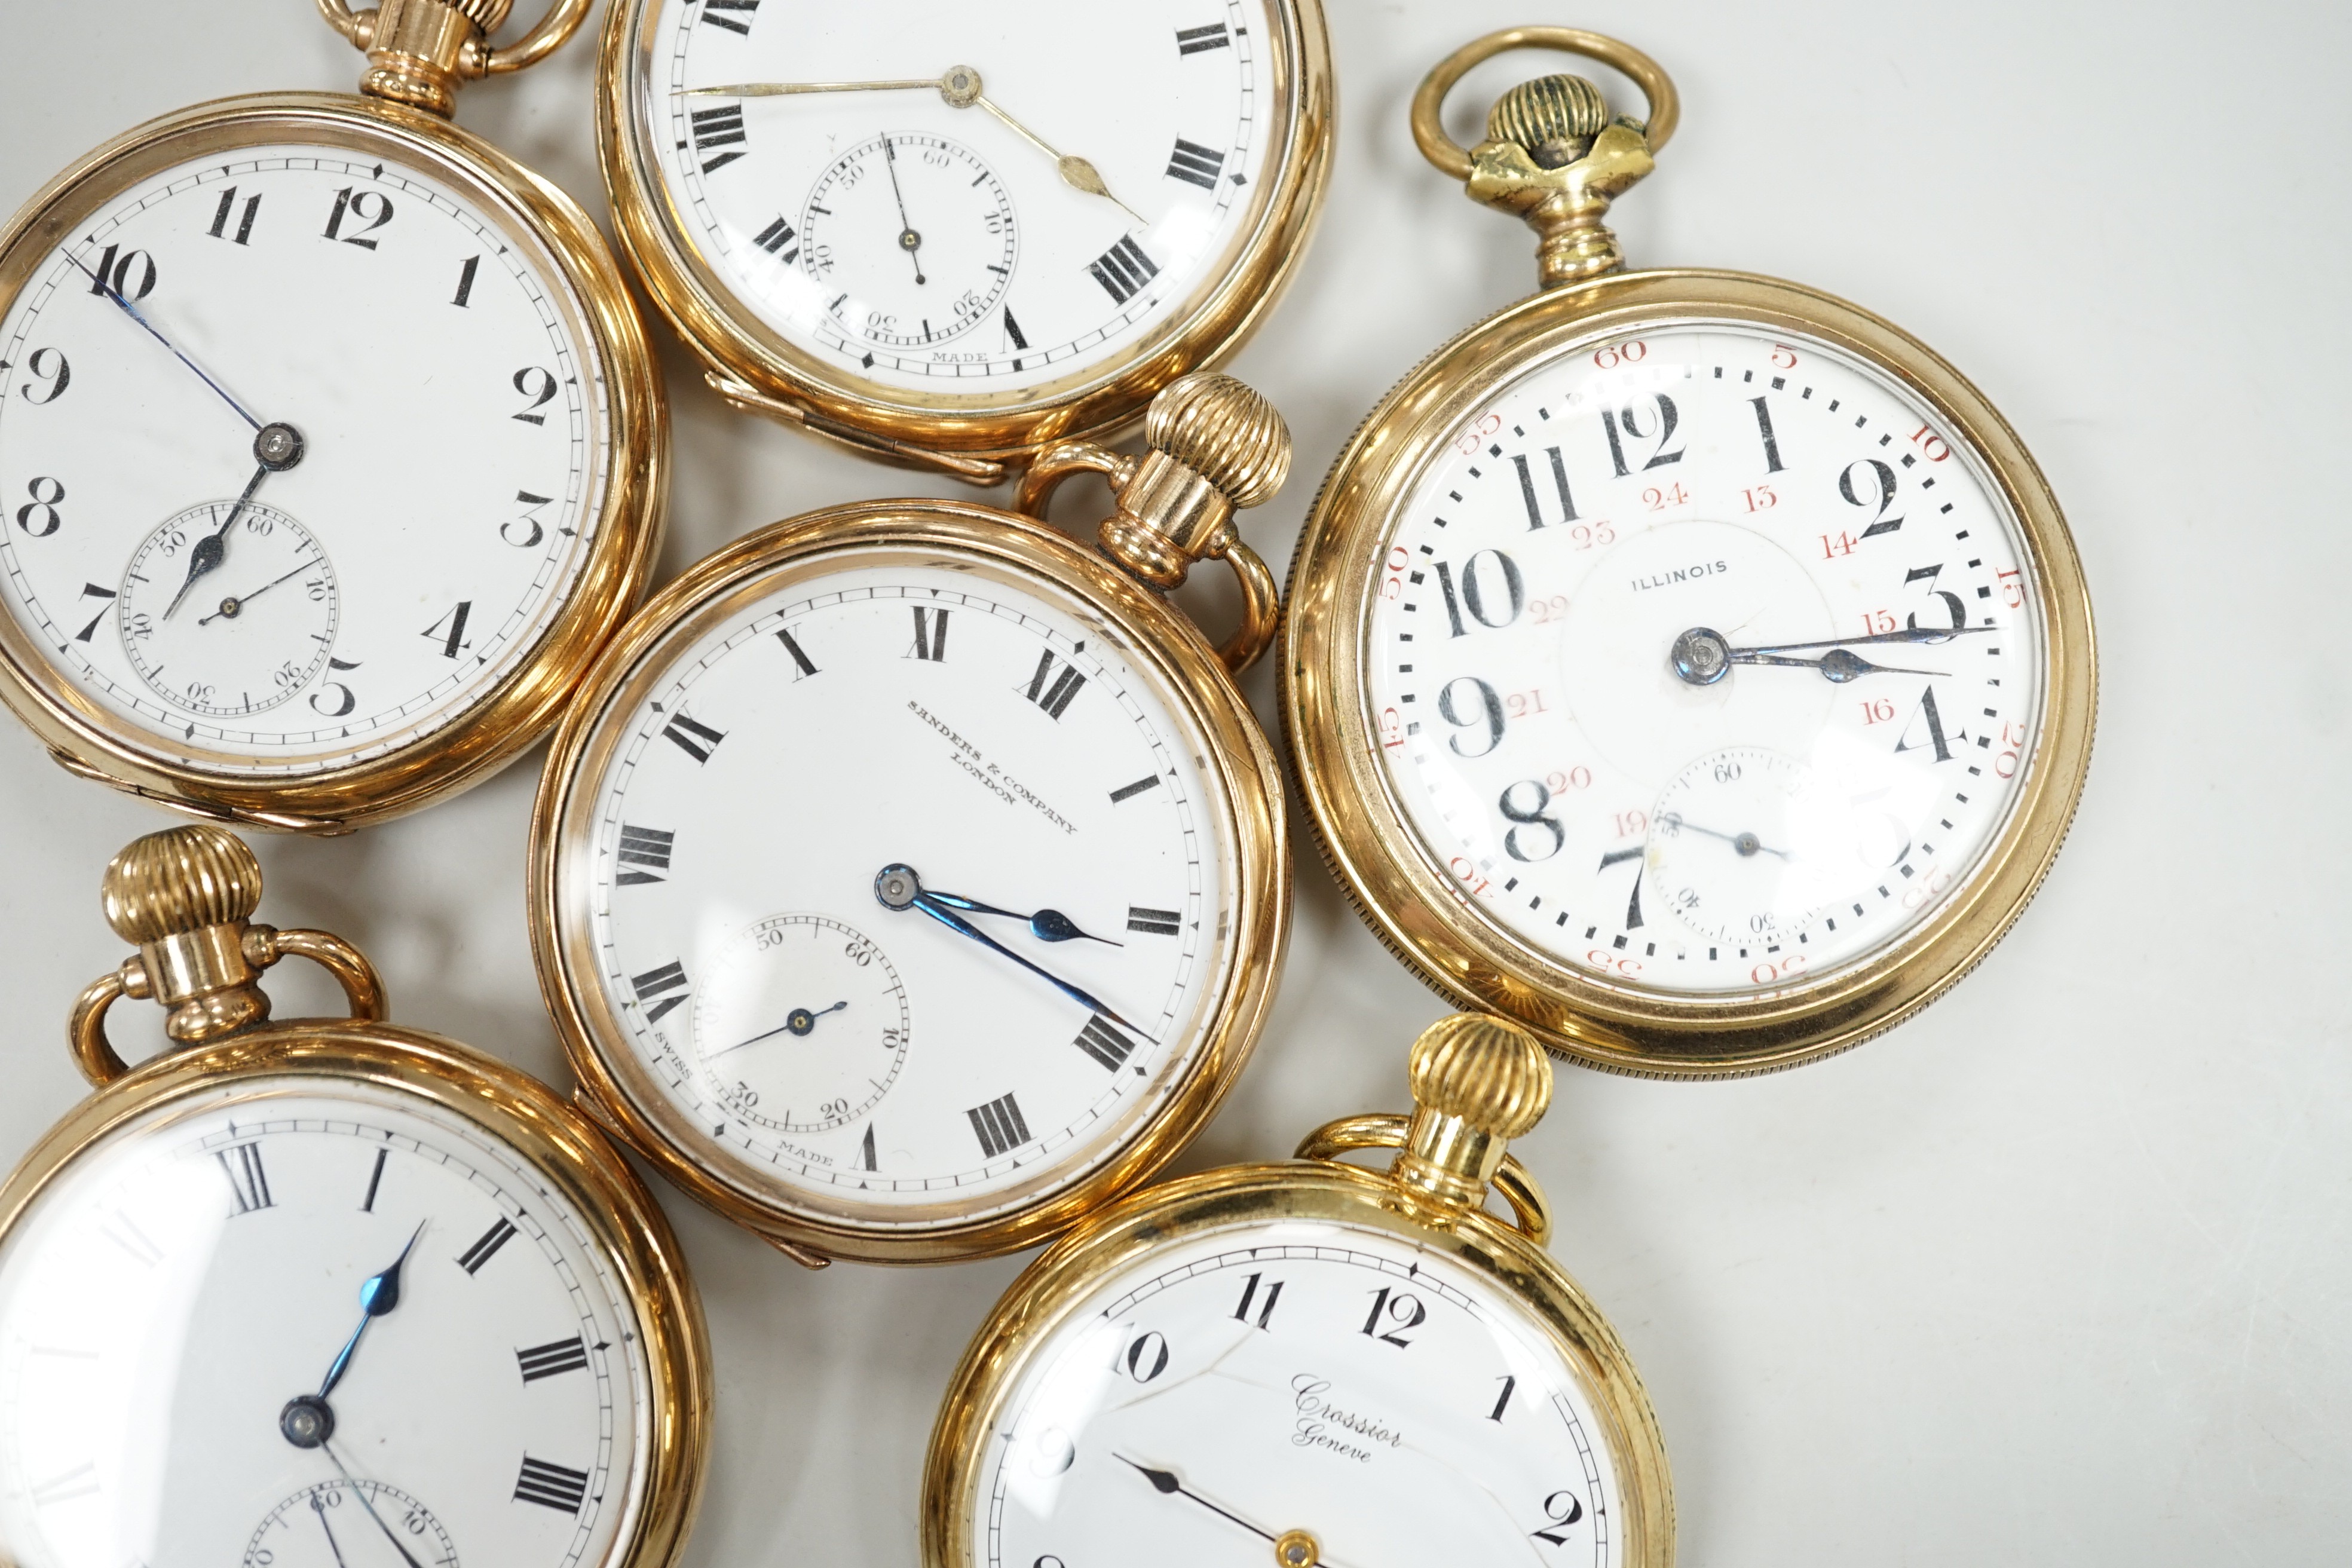 Six assorted gold plated open faces pocket watches, including Limit and Sanders Company. - Image 5 of 6